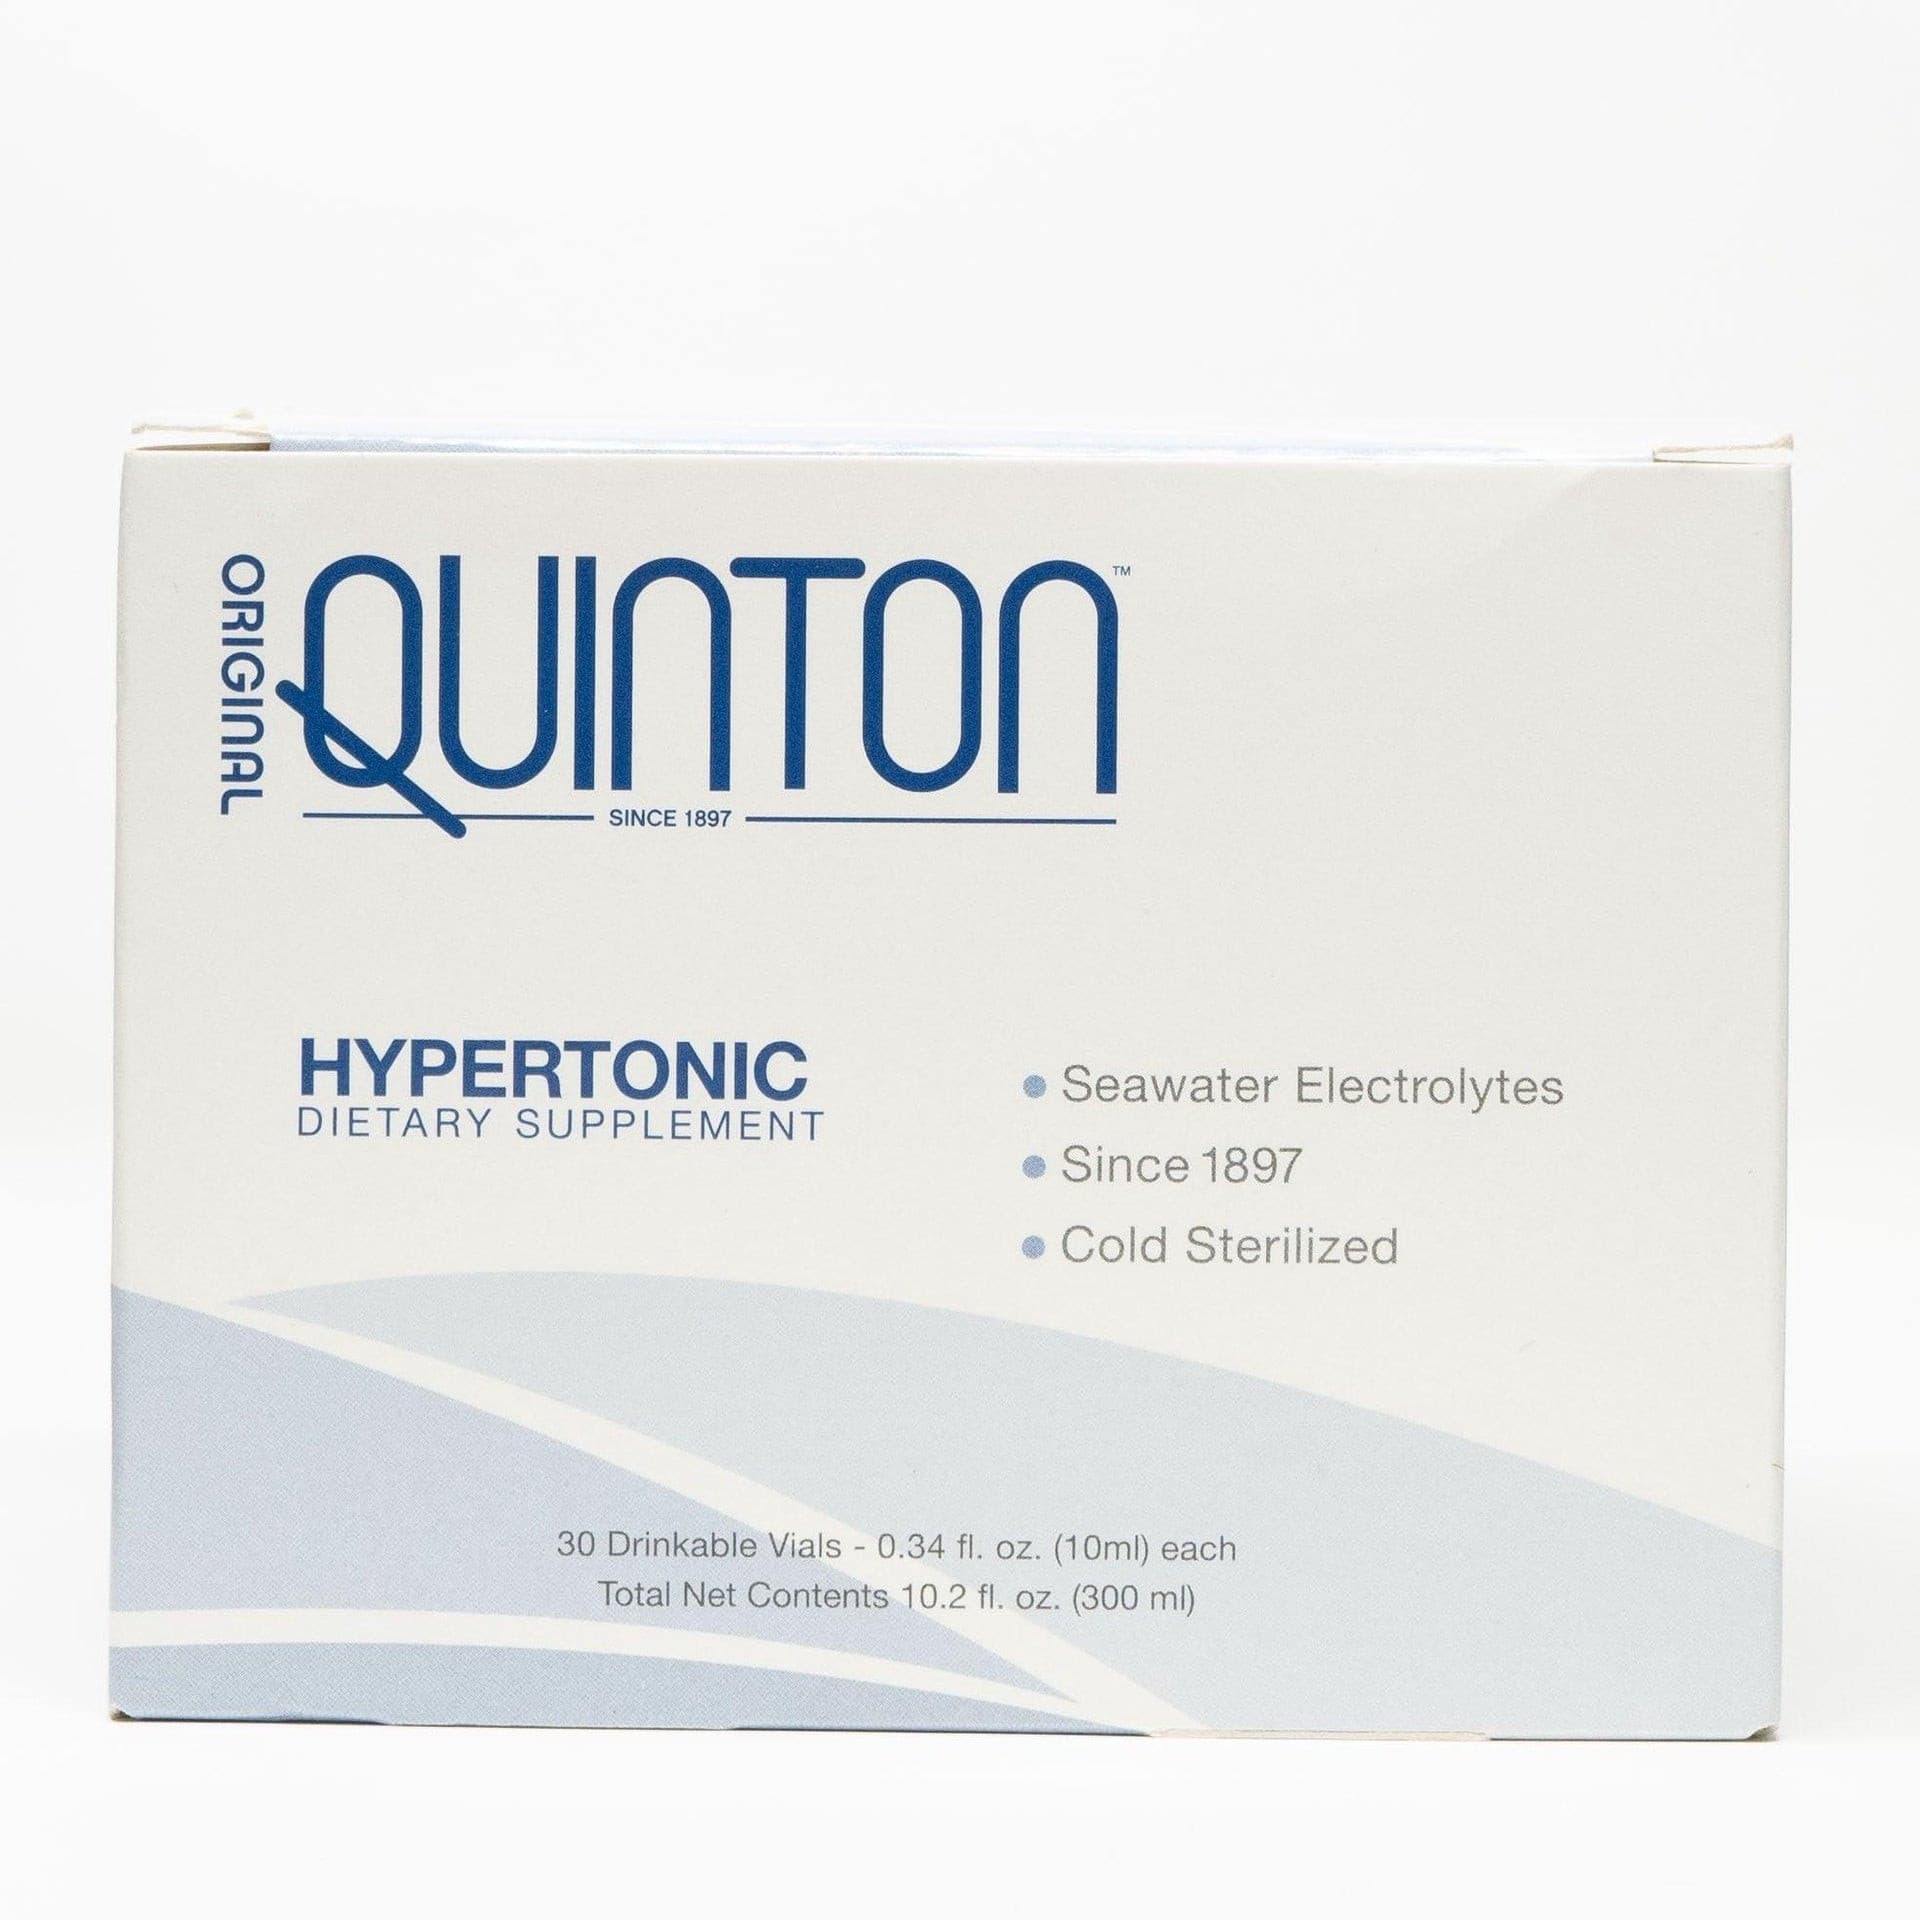 Quinton Hypertonic ampoules – Perfectly Healthy